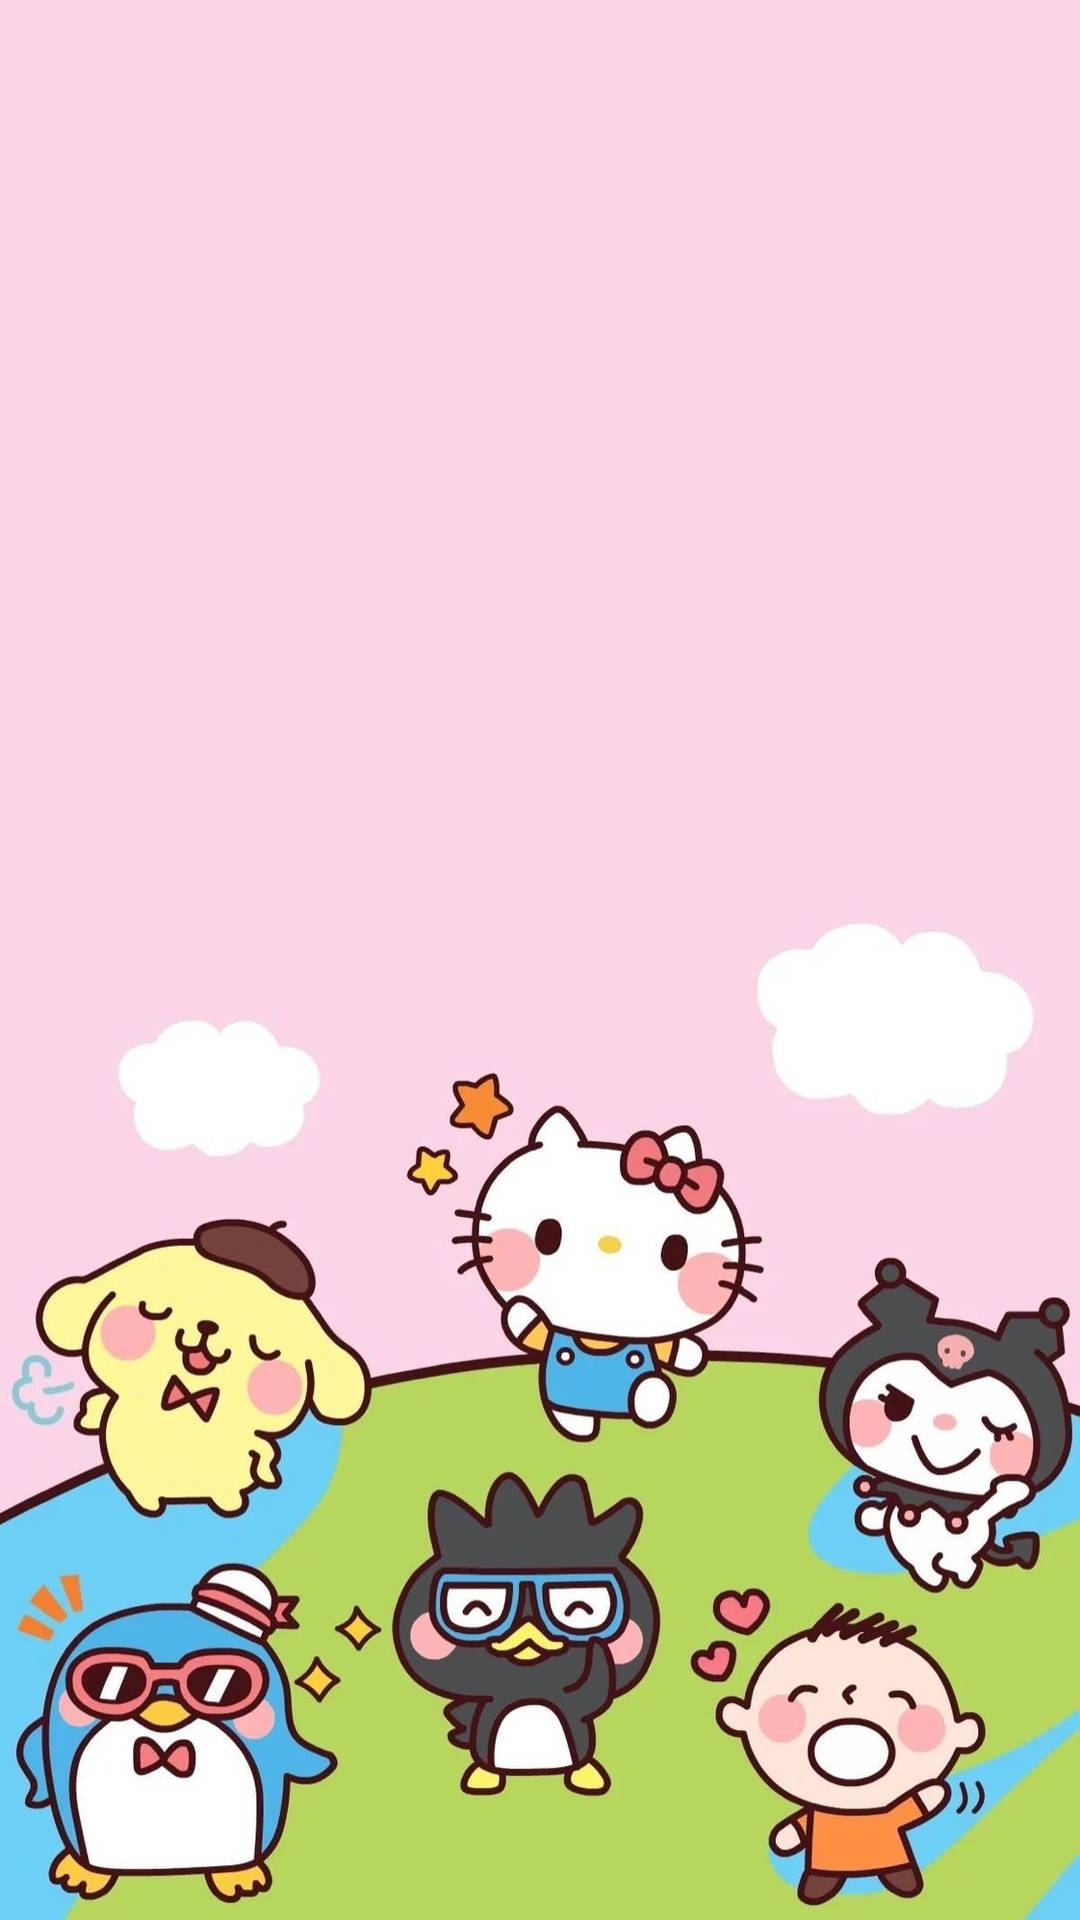 “Look how cute Sanrio character looks in this adorable pastel outfit” Wallpaper